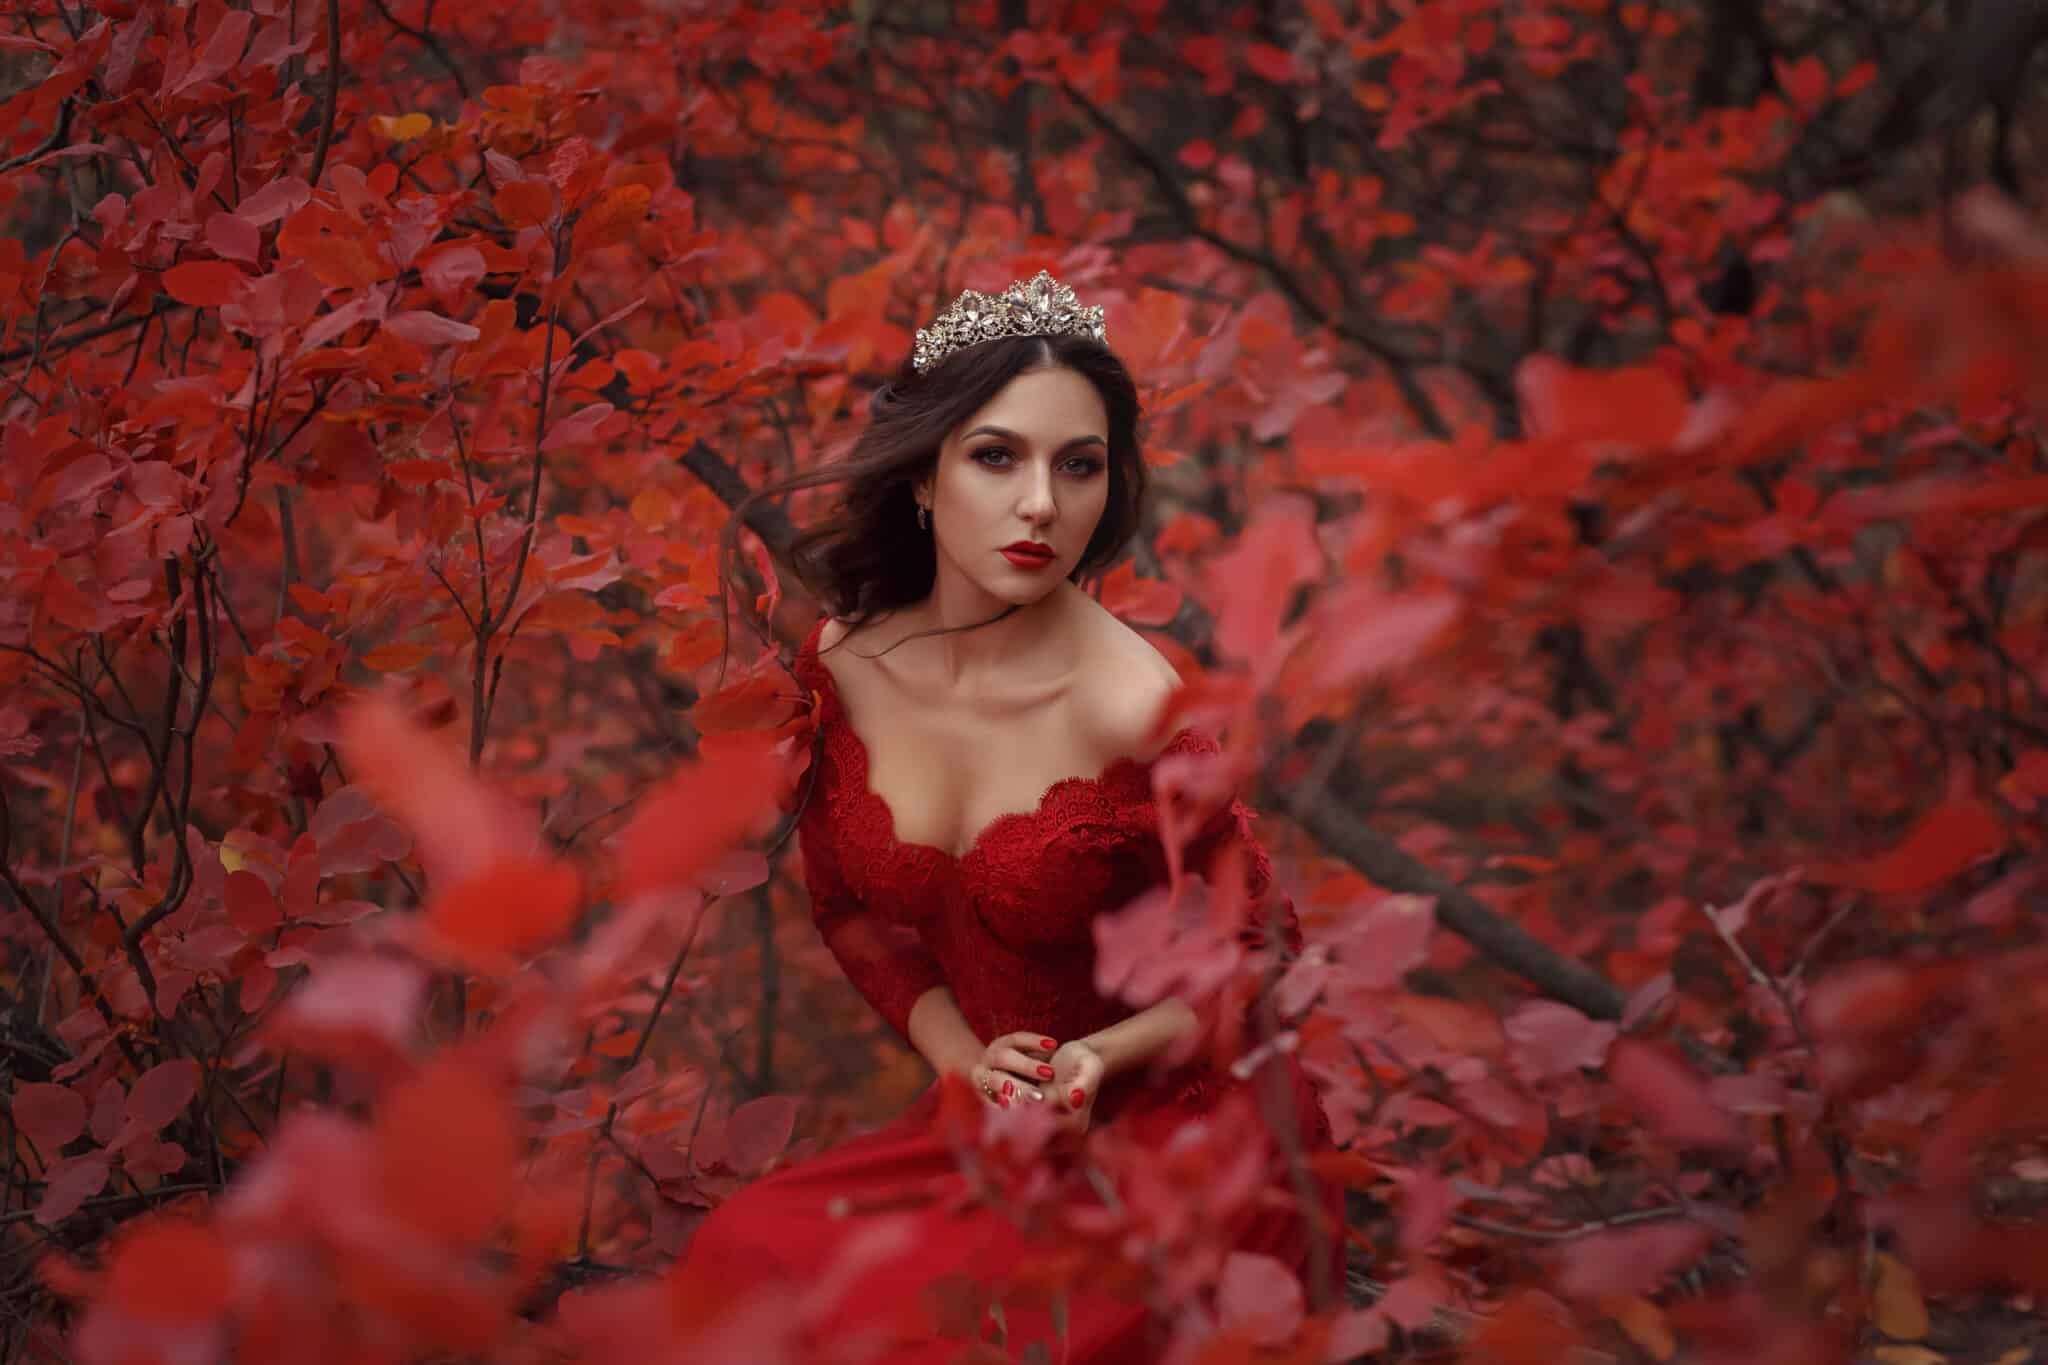 Incredible stunning girl in a red dress. The background is fantastic autumn.